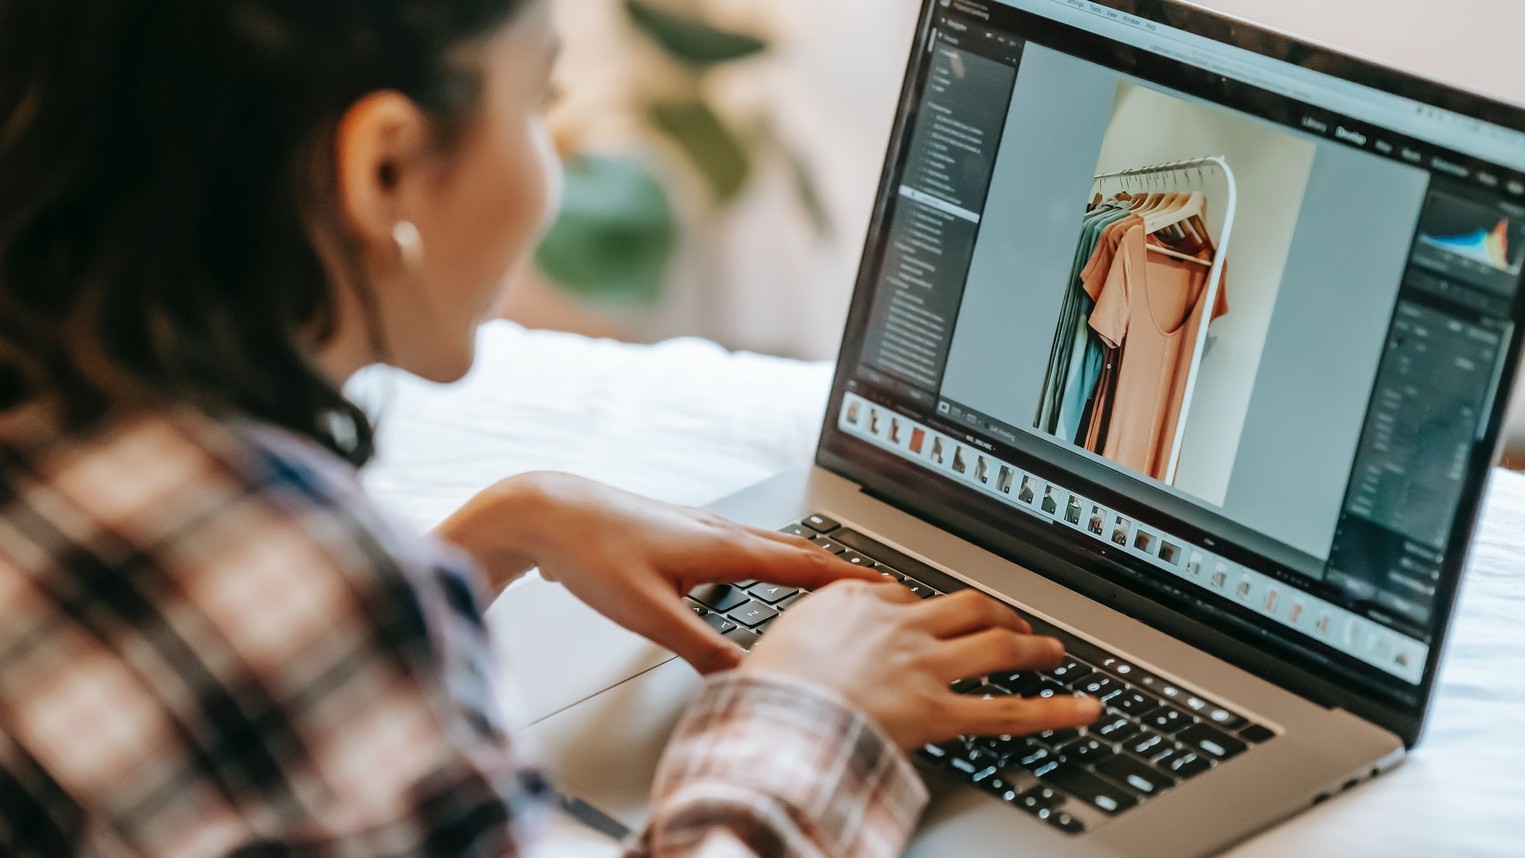 The best photo-editing software in 2022